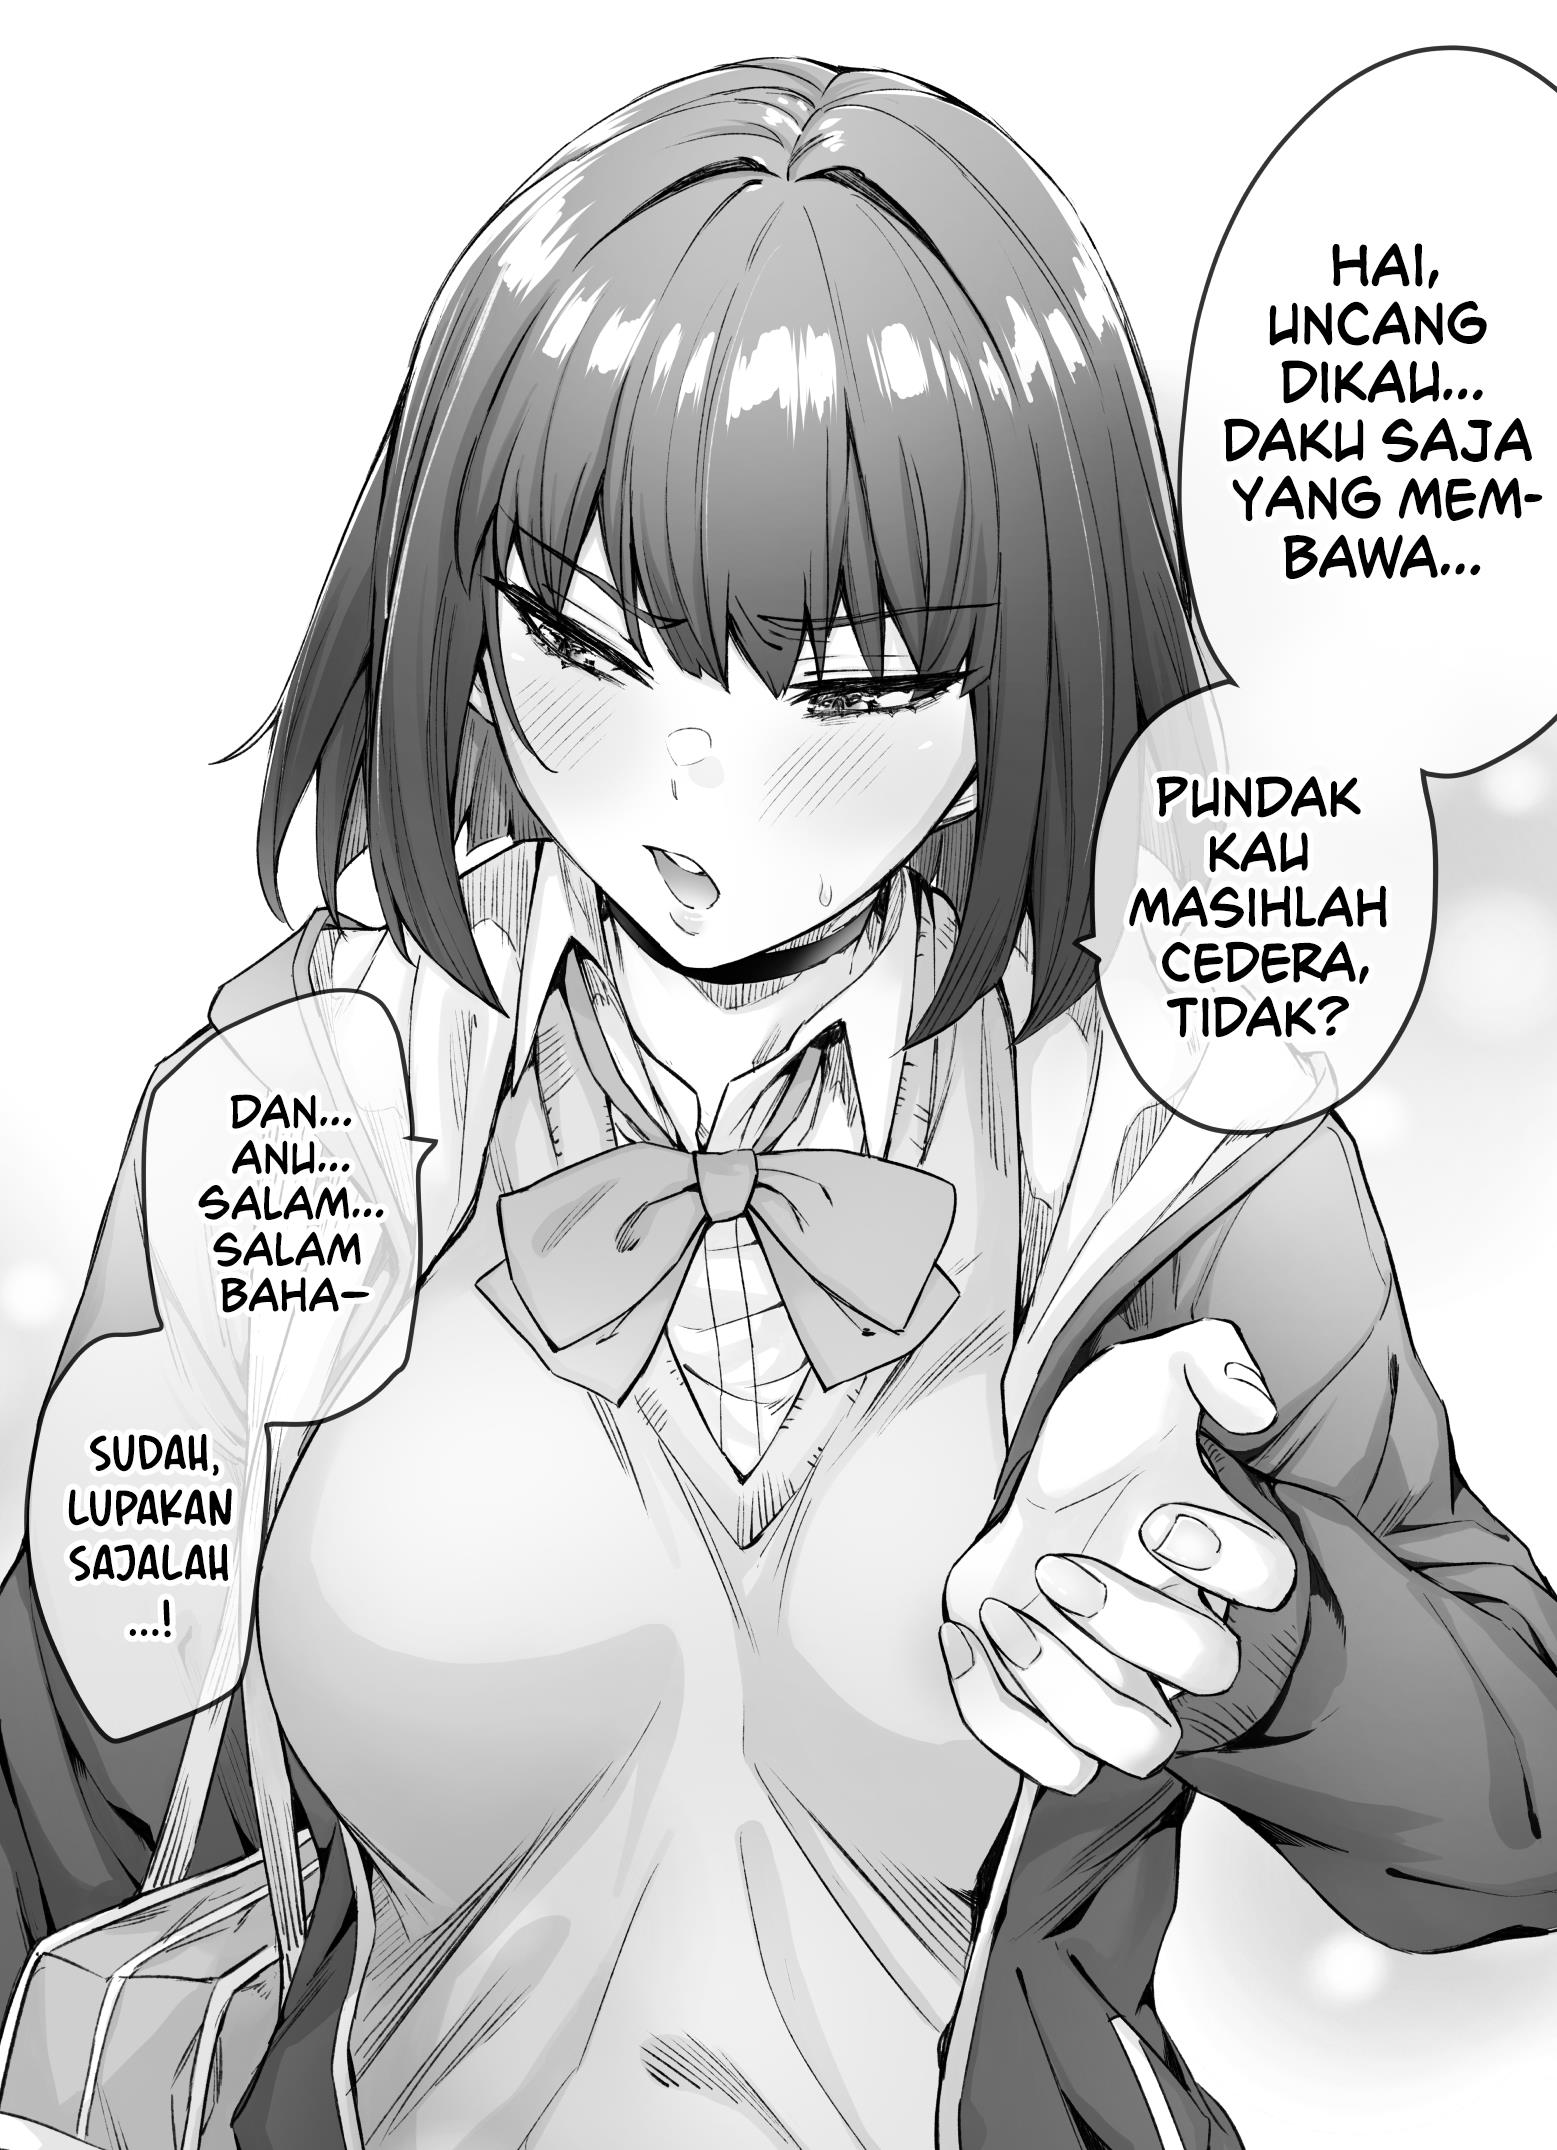 The Tsuntsuntsuntsuntsuntsun tsuntsuntsuntsuntsundere Girl Getting Less and Less Tsun Day by Day Chapter 12.1